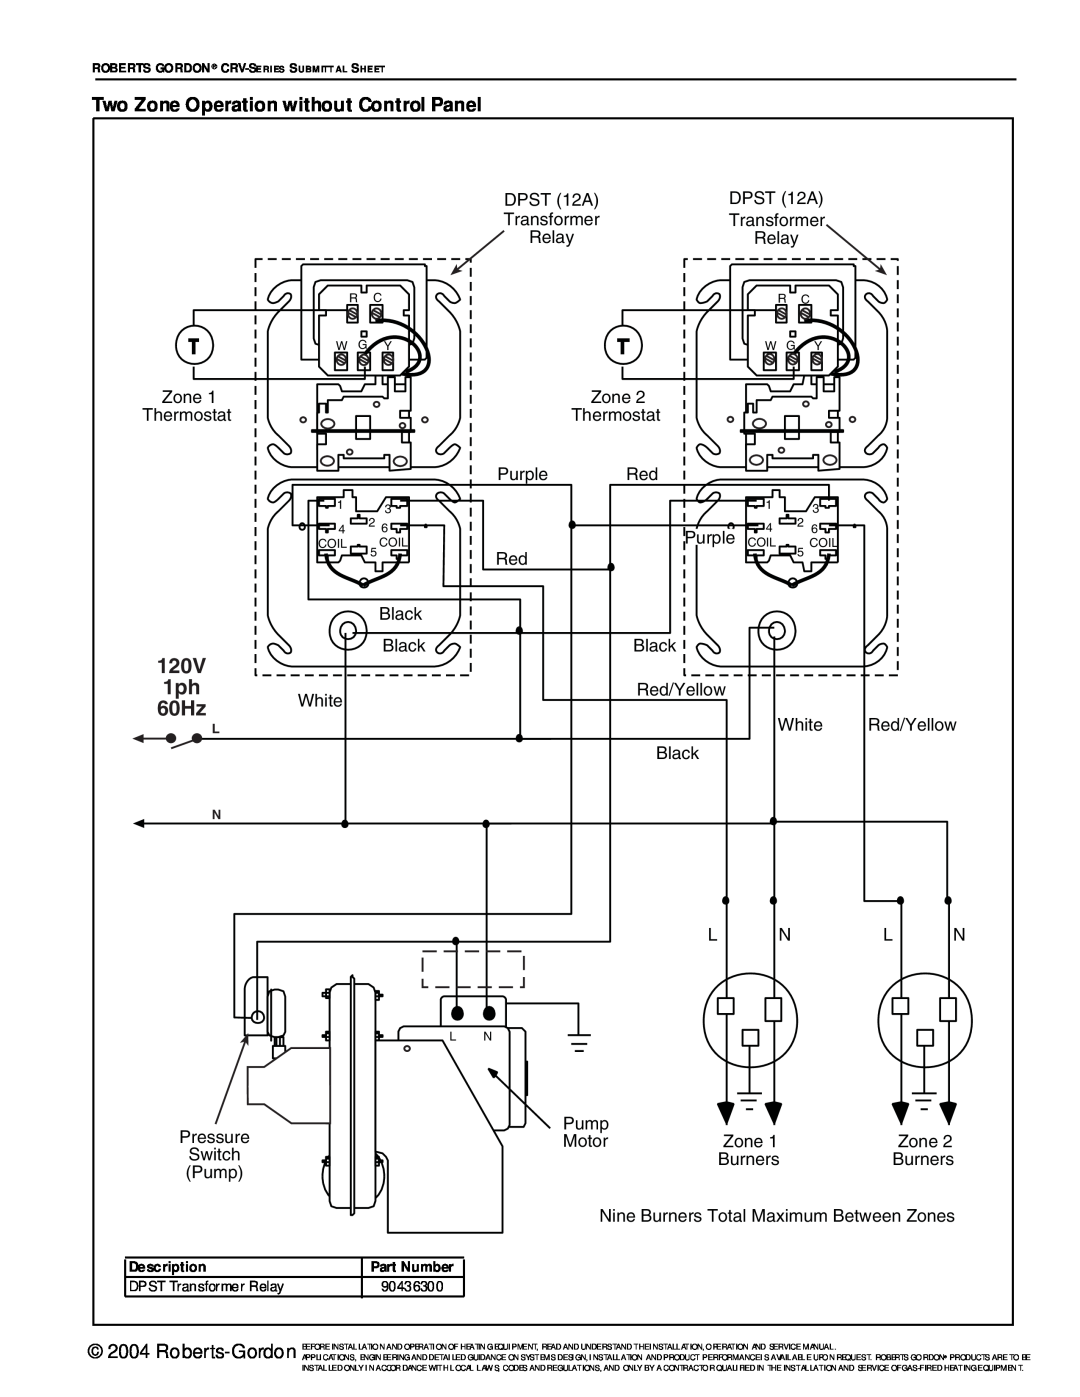 Roberts Gorden CRV-Series service manual 60Hz, Two Zone Operation without Control Panel, 120V 